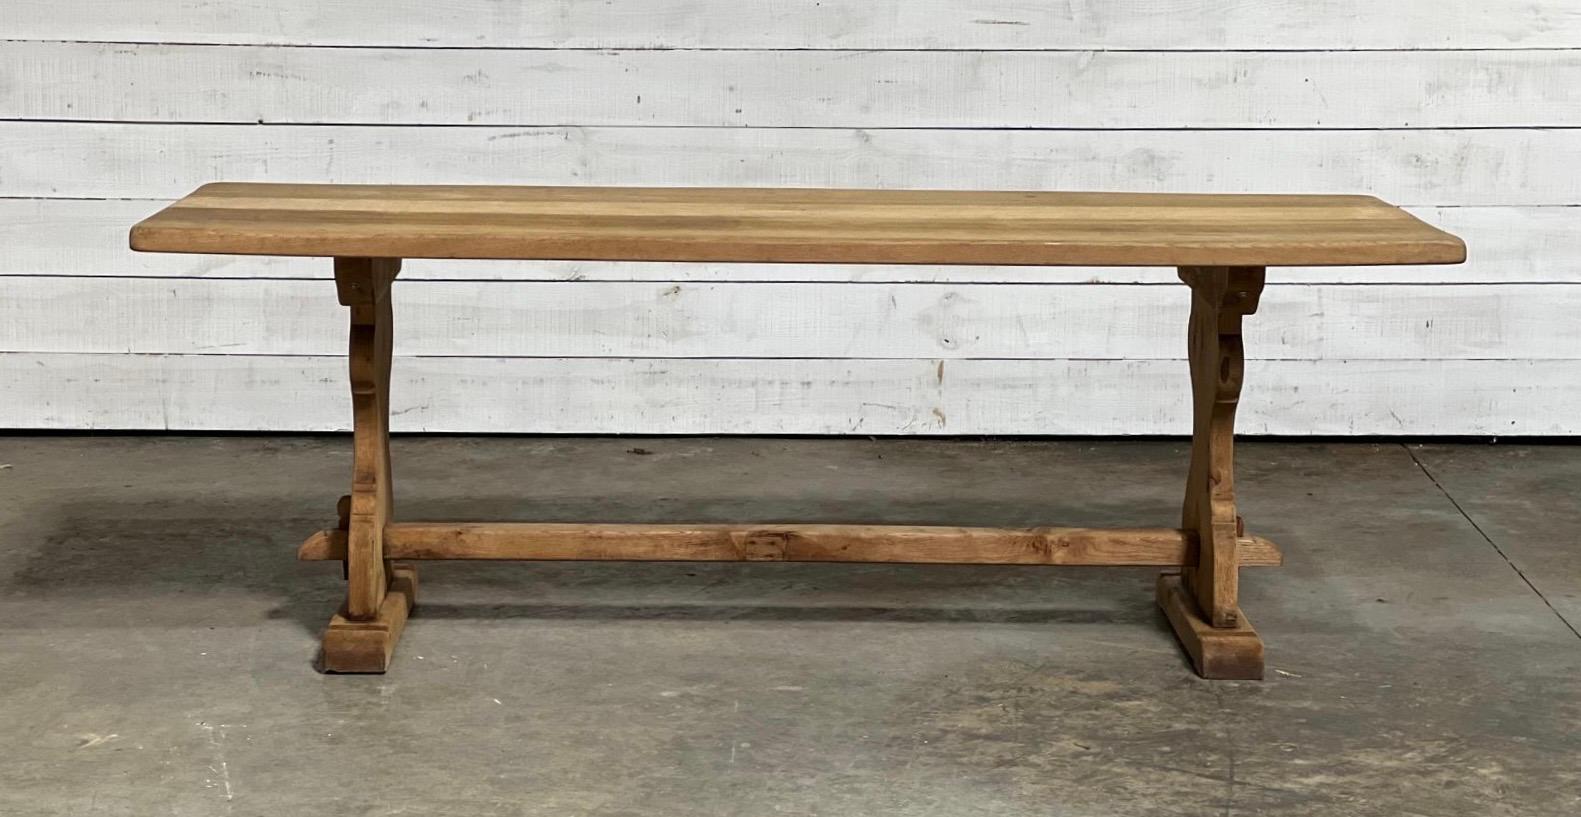 A good quality French Farmhouse Dining Table, made from solid Oak and dating to the early 1900s. Of excellent quality construction this table will be around for generations to come. We have bleached it for a lighter look and to bring out the natural